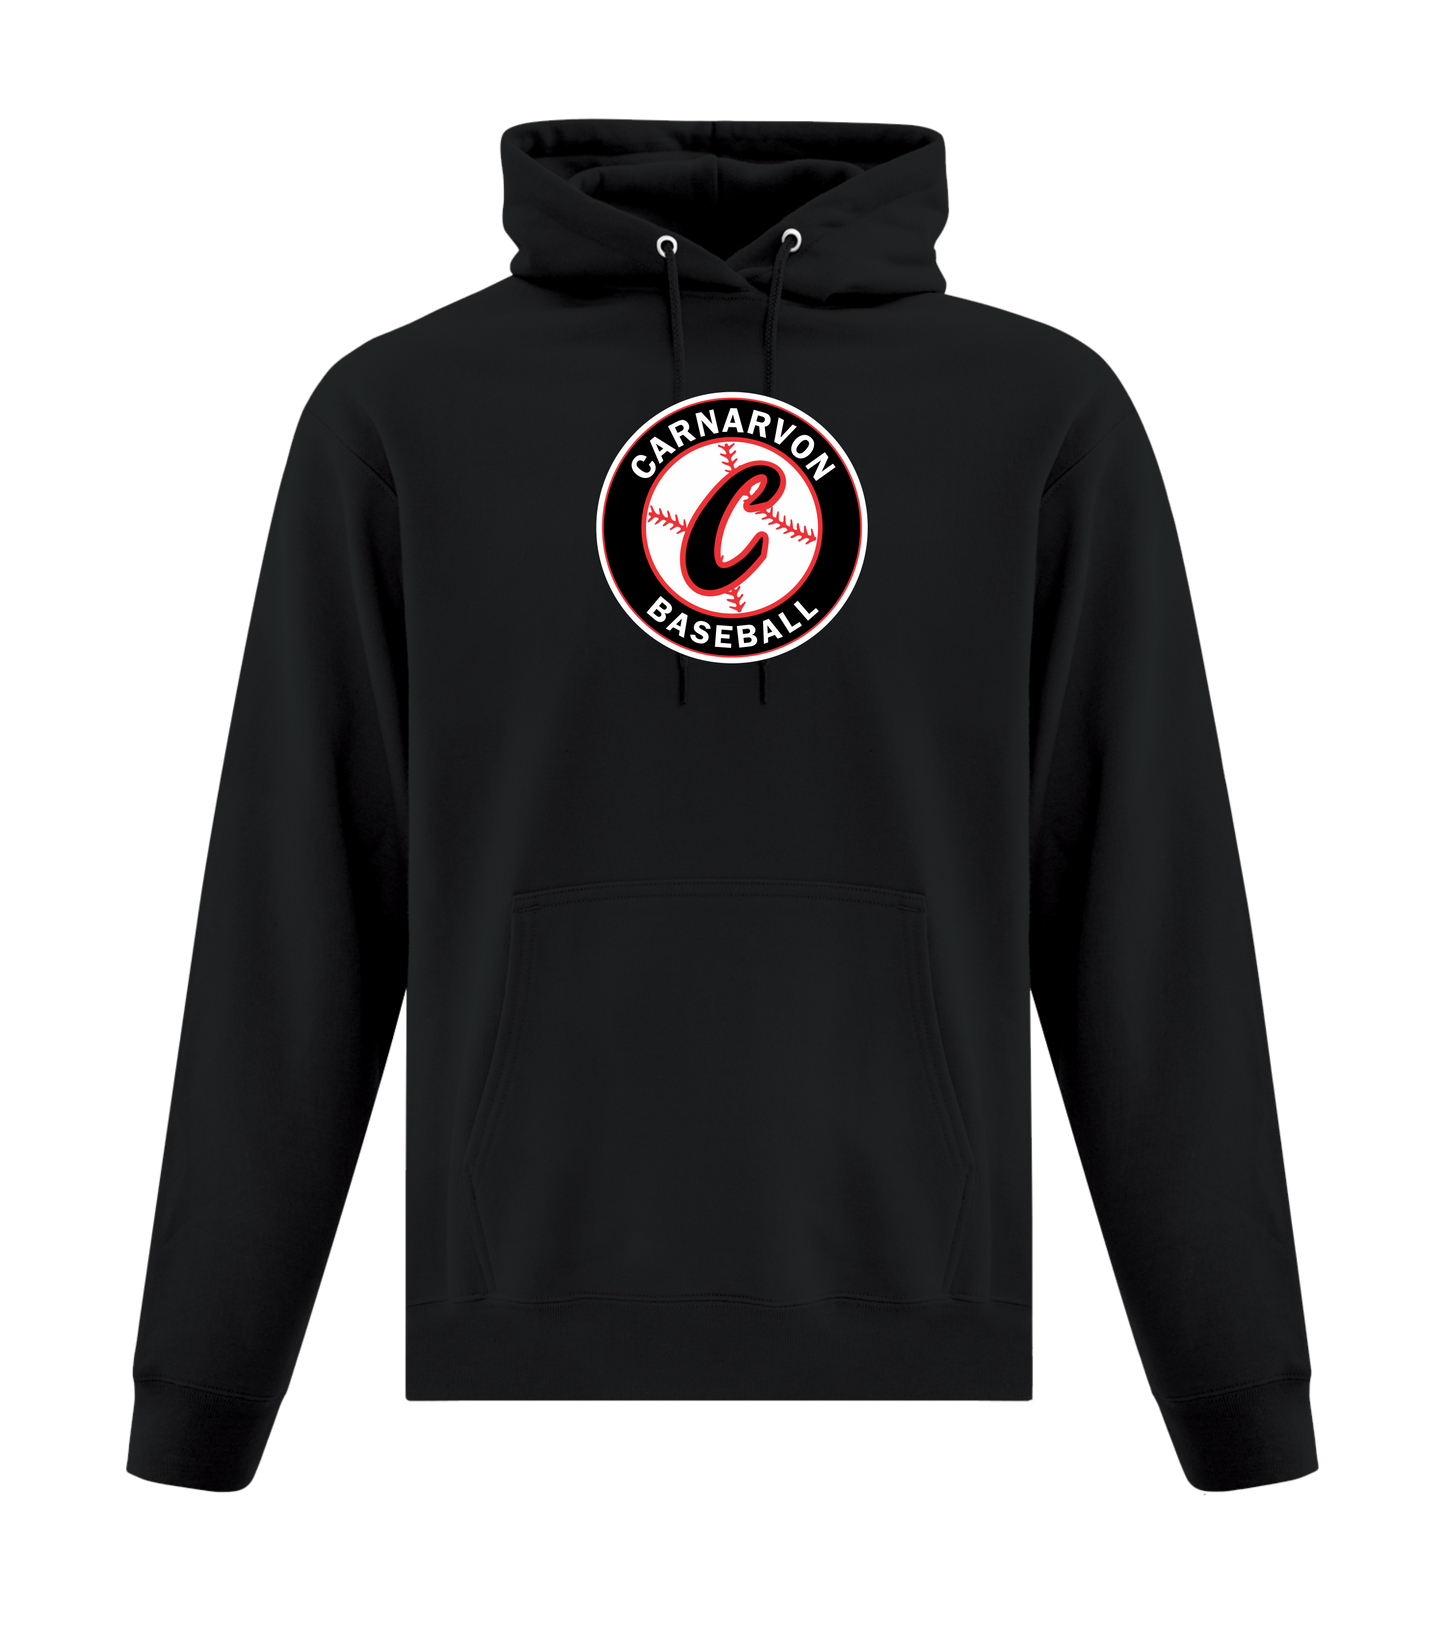 Carnarvon Baseball Unisex and Youth Pullover Black Cotton Hoodie